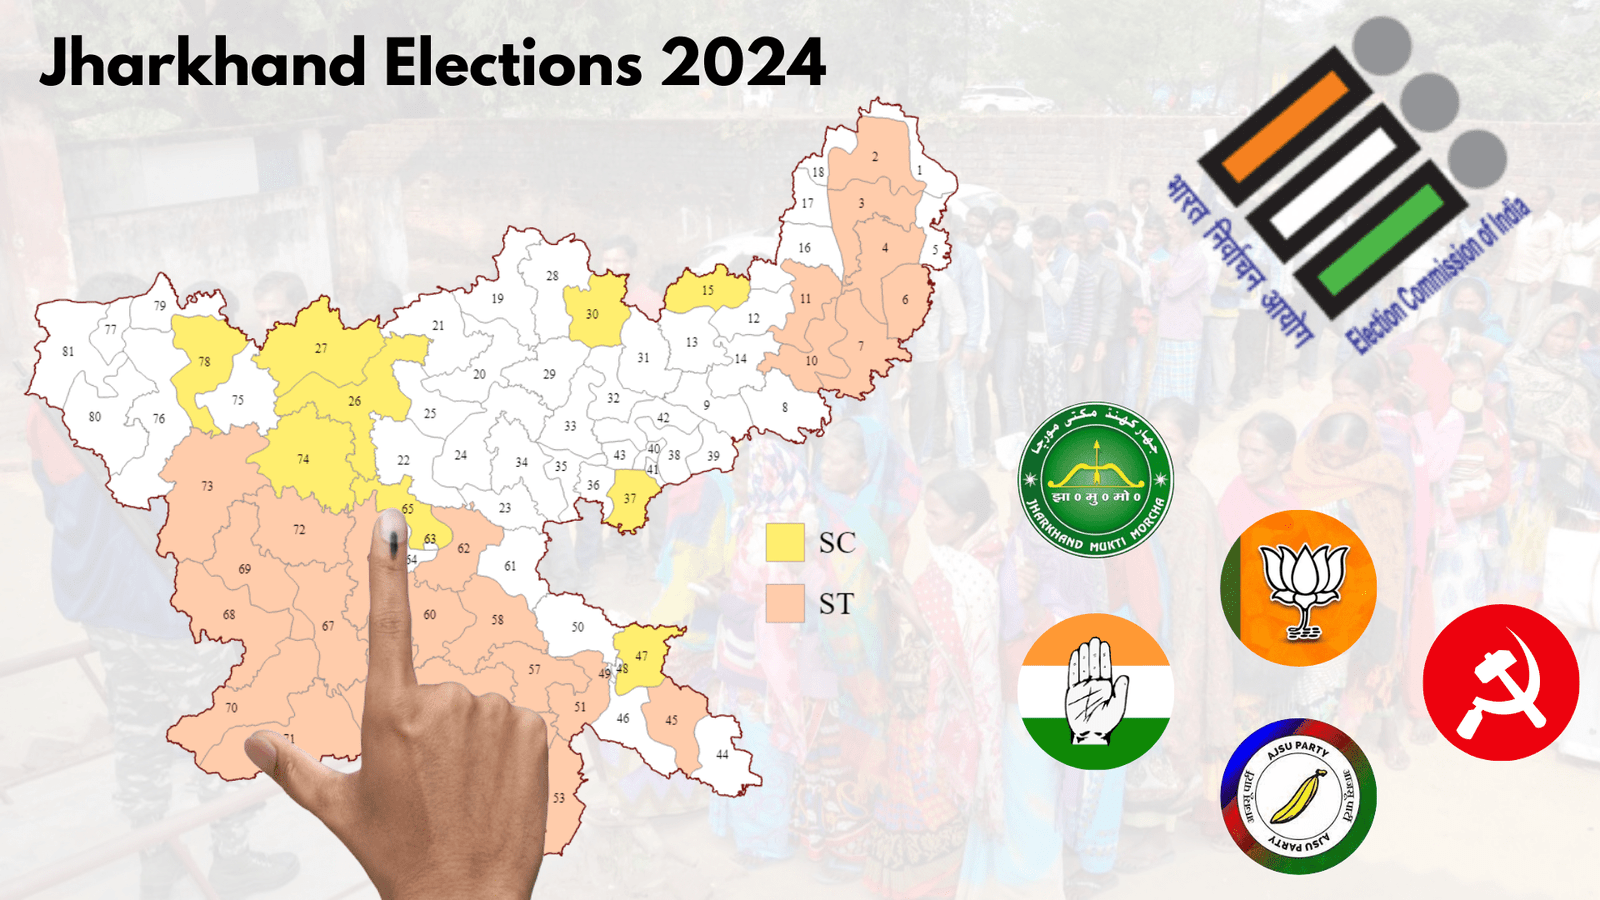 Jharkhand State Elections 2024: Analysing Trends and Prospects